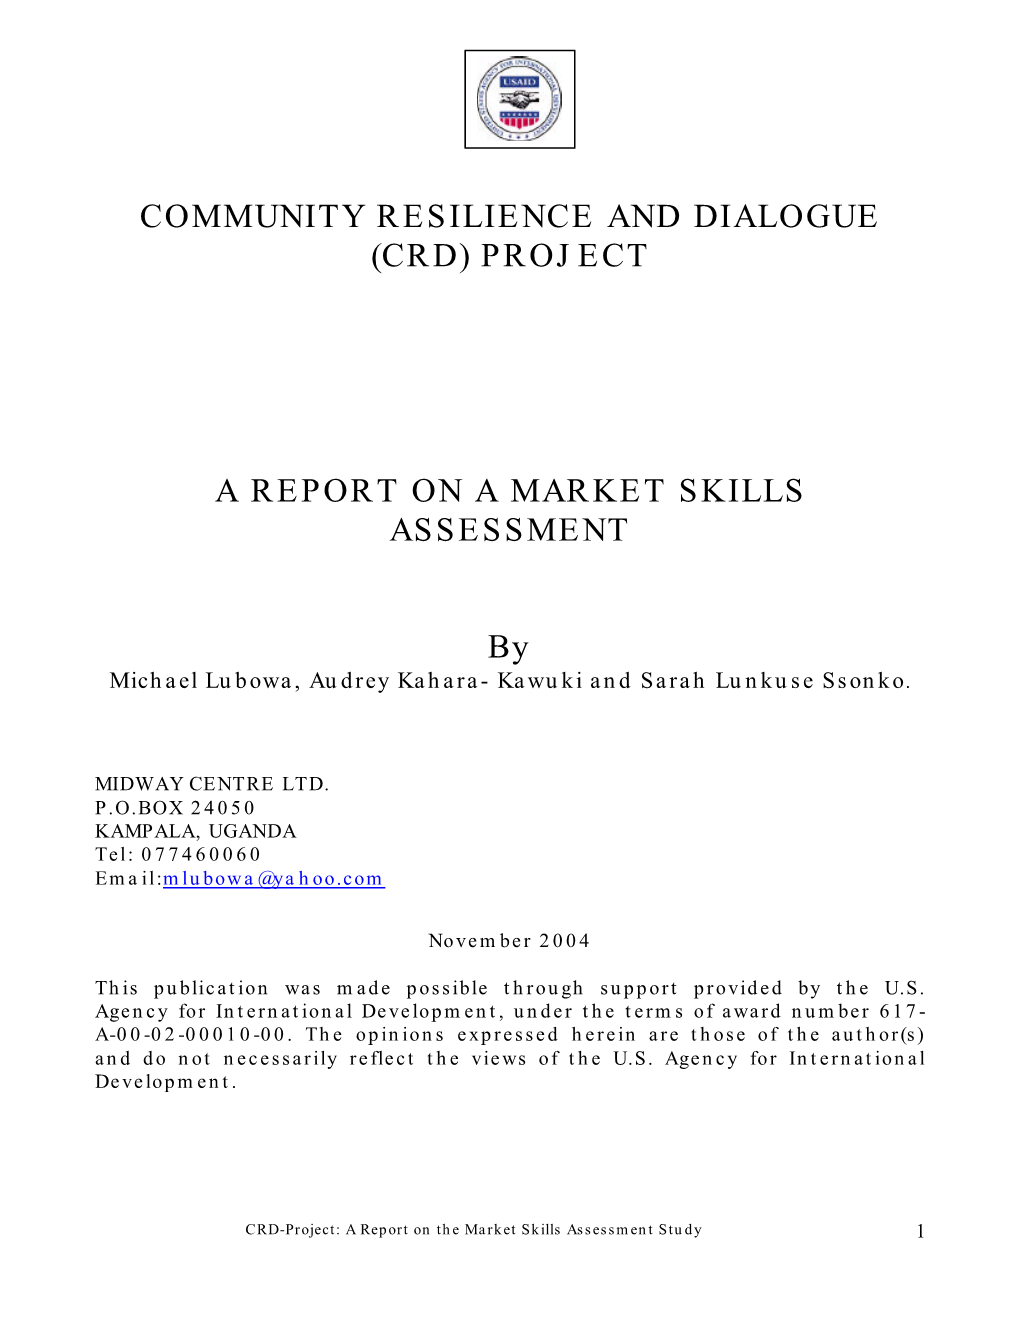 Community Resilience and Dialogue (Crd) Project A